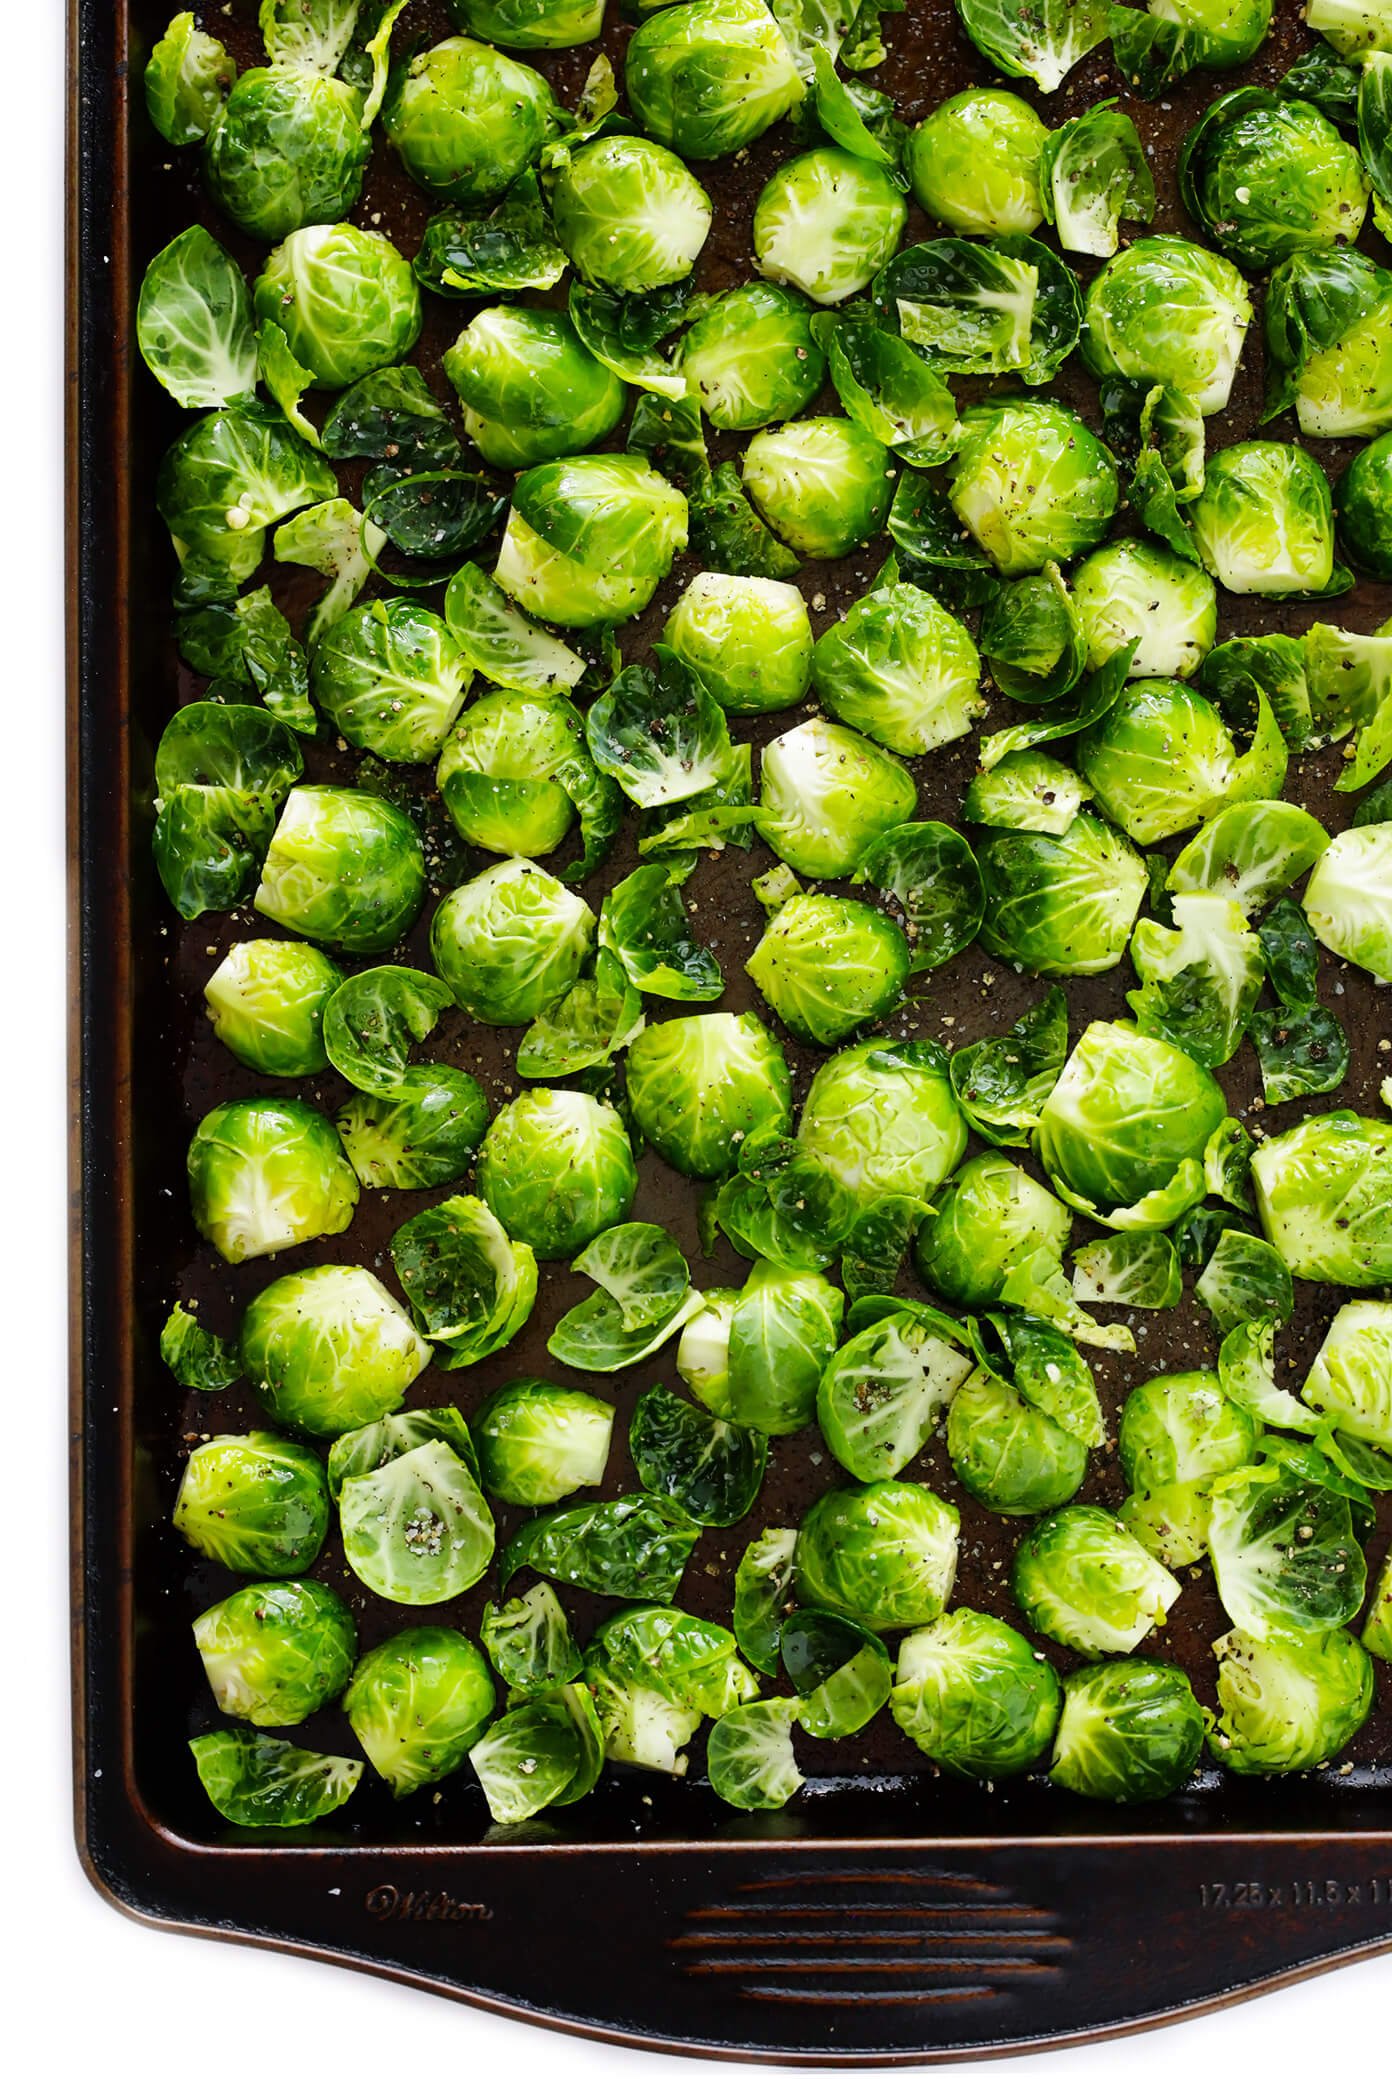 How To Roast Brussels Sprouts